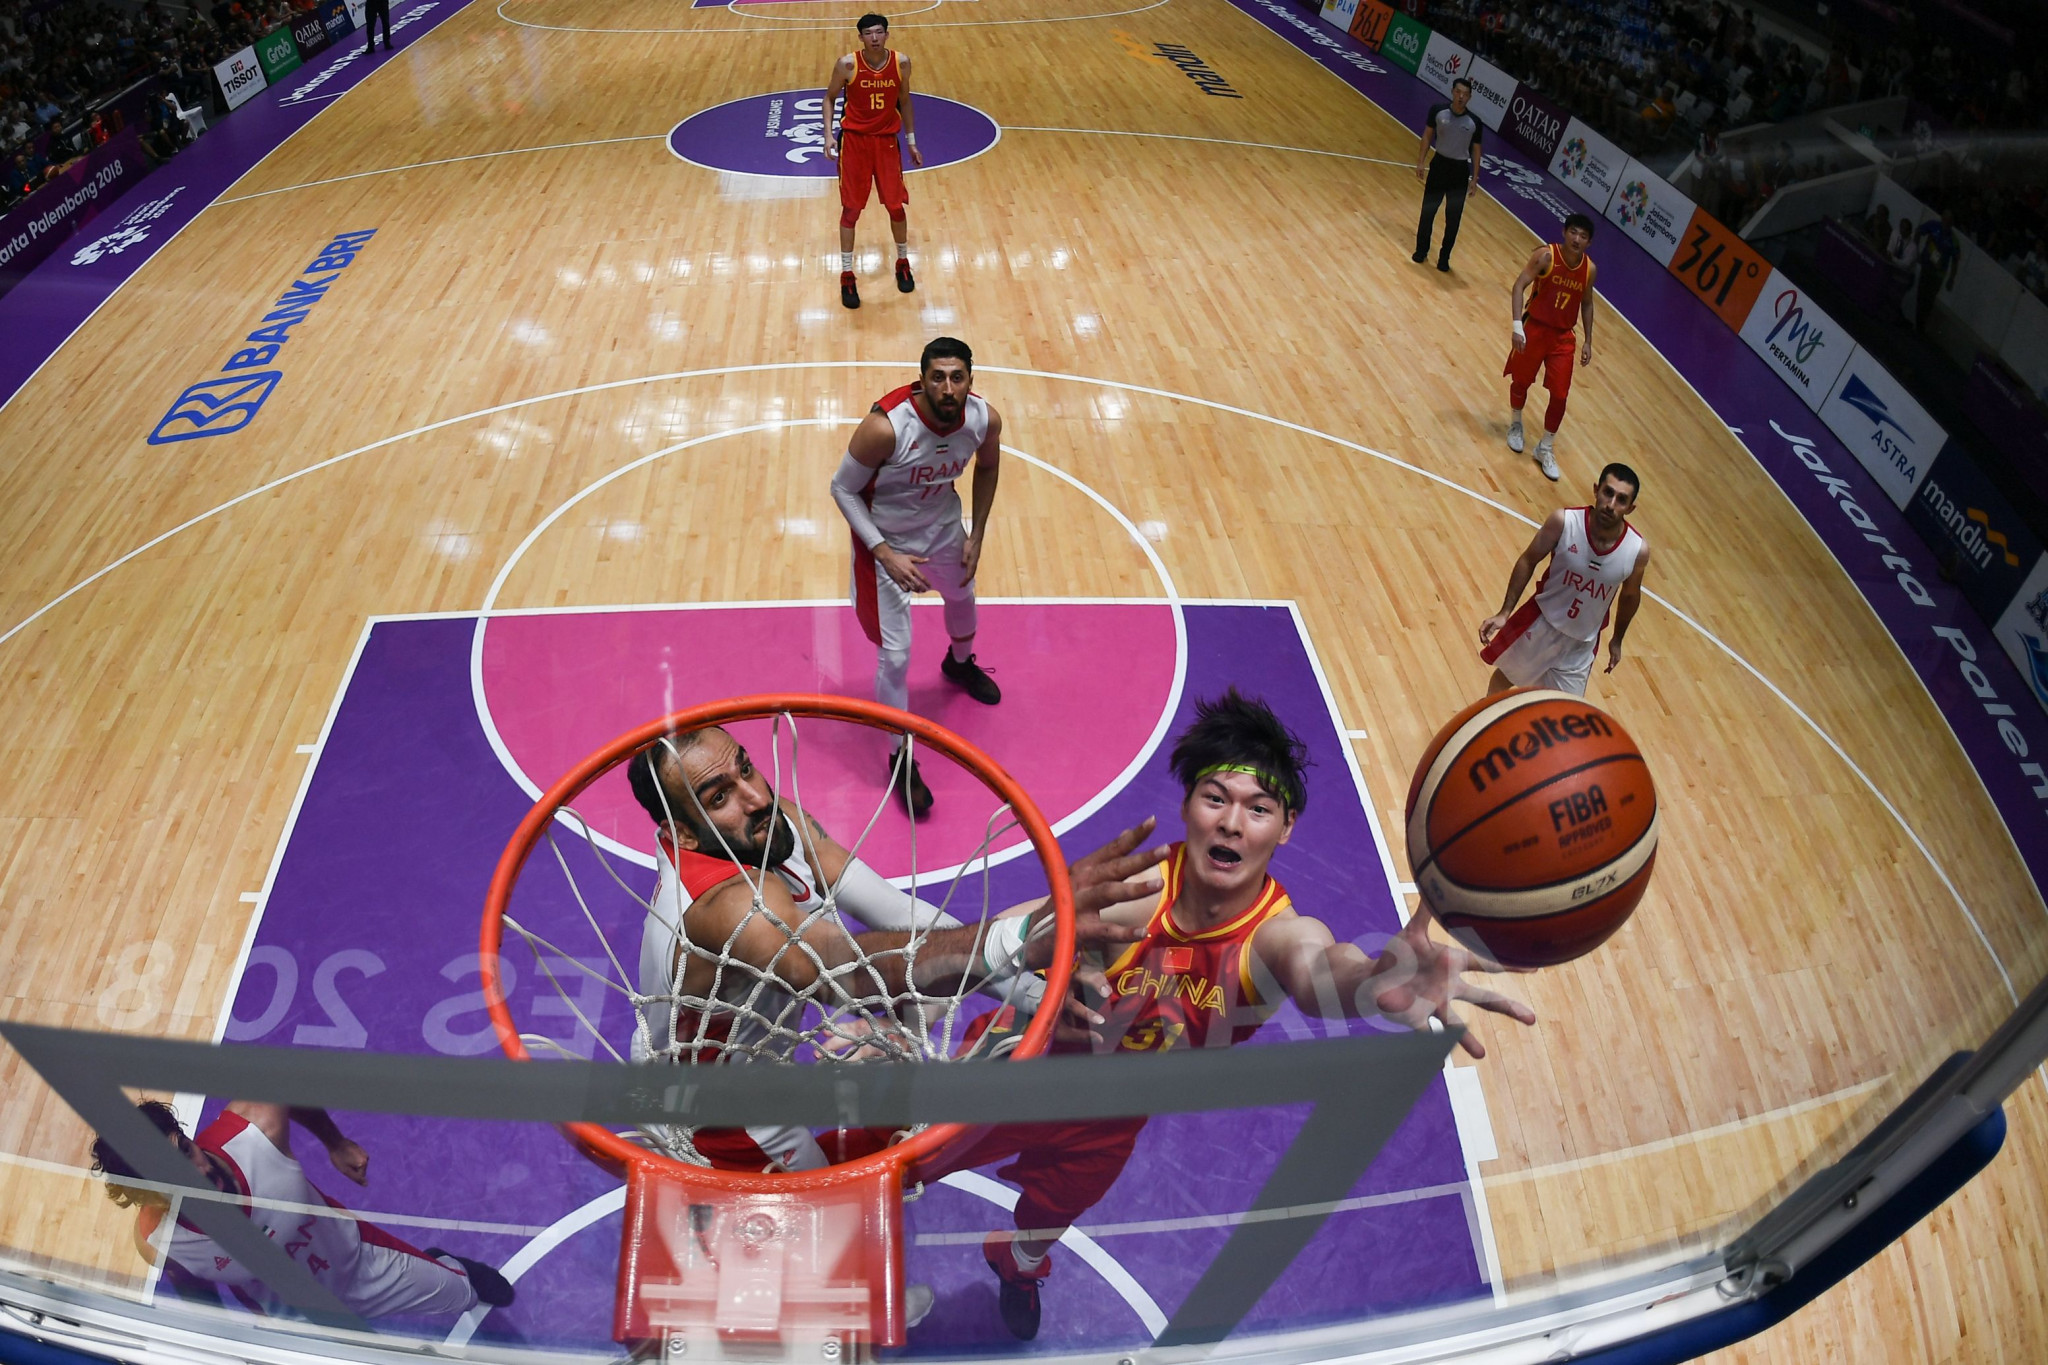 Basketball was among the sports played when Jakarta hosted the 2018 Asian Games ©Getty Images